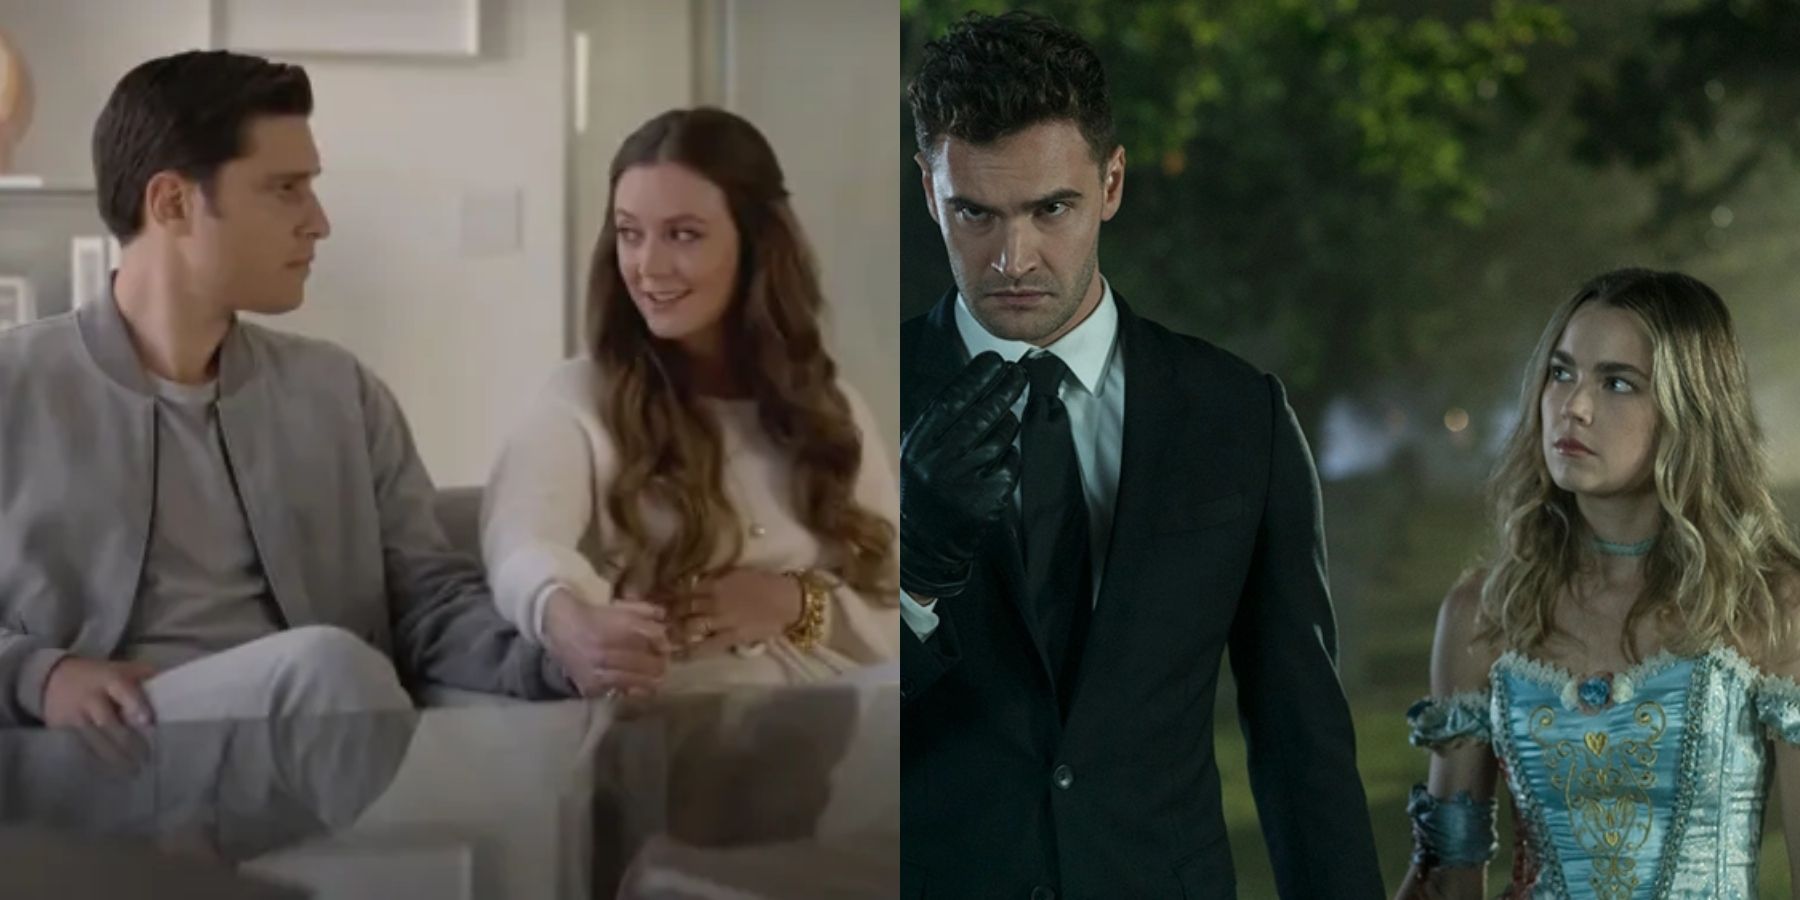 Split image of Ronan Rubenstein and Billie Lourd in American Horror Stories and Tom Bateman and Rebecca Rittenhouse in Into The Dark